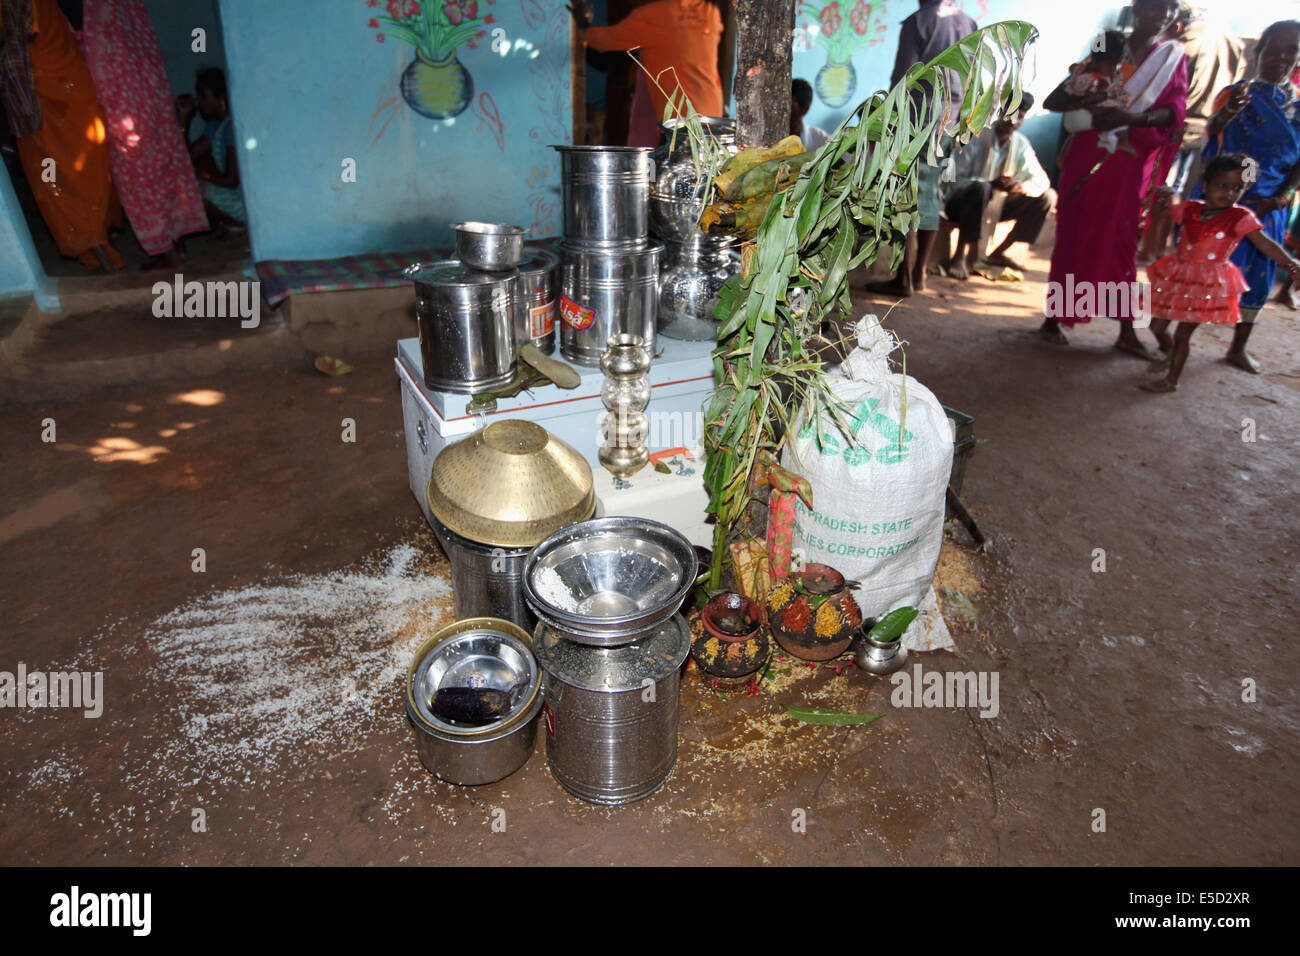 Gifts arranged for a wedding ceremony, Baiga tribe, Chattisgadh, India Stock Photo